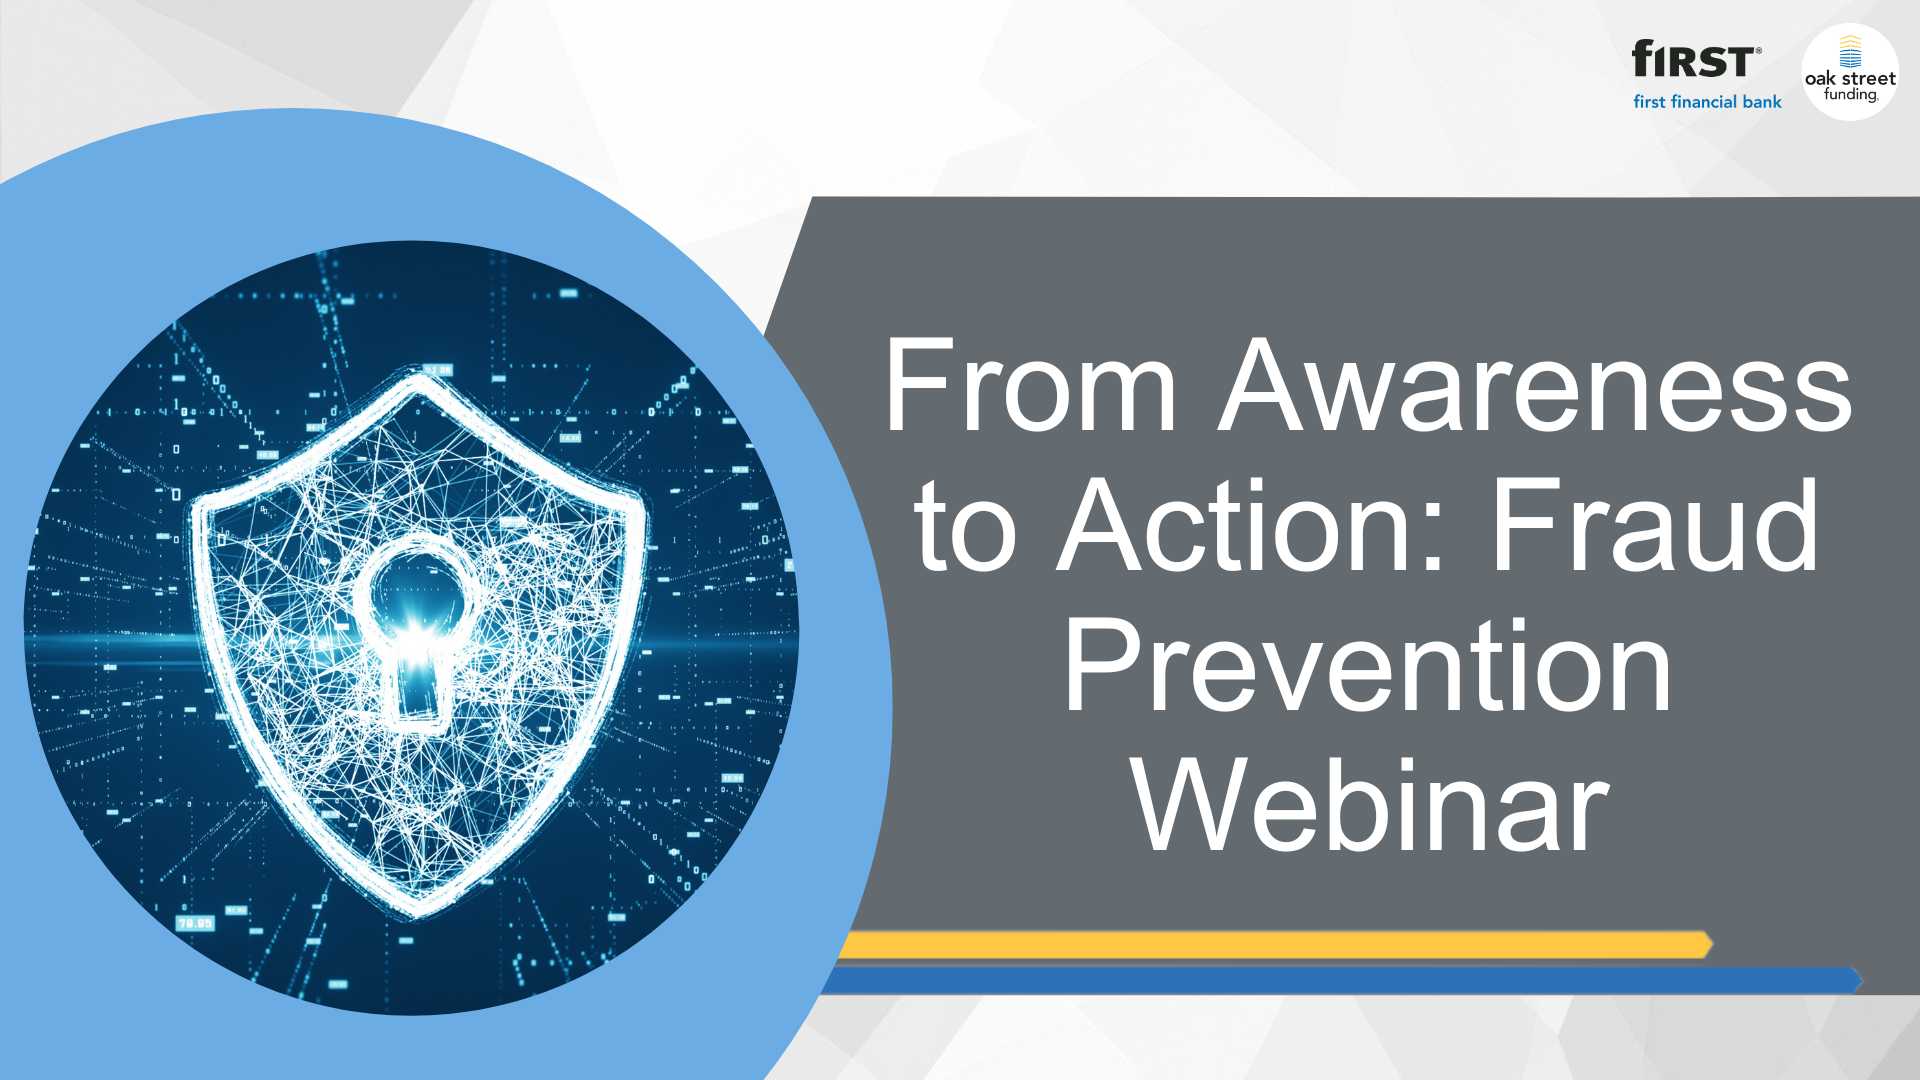 From Awareness to Action: Fraud Prevention Webinar by First Financial Bank